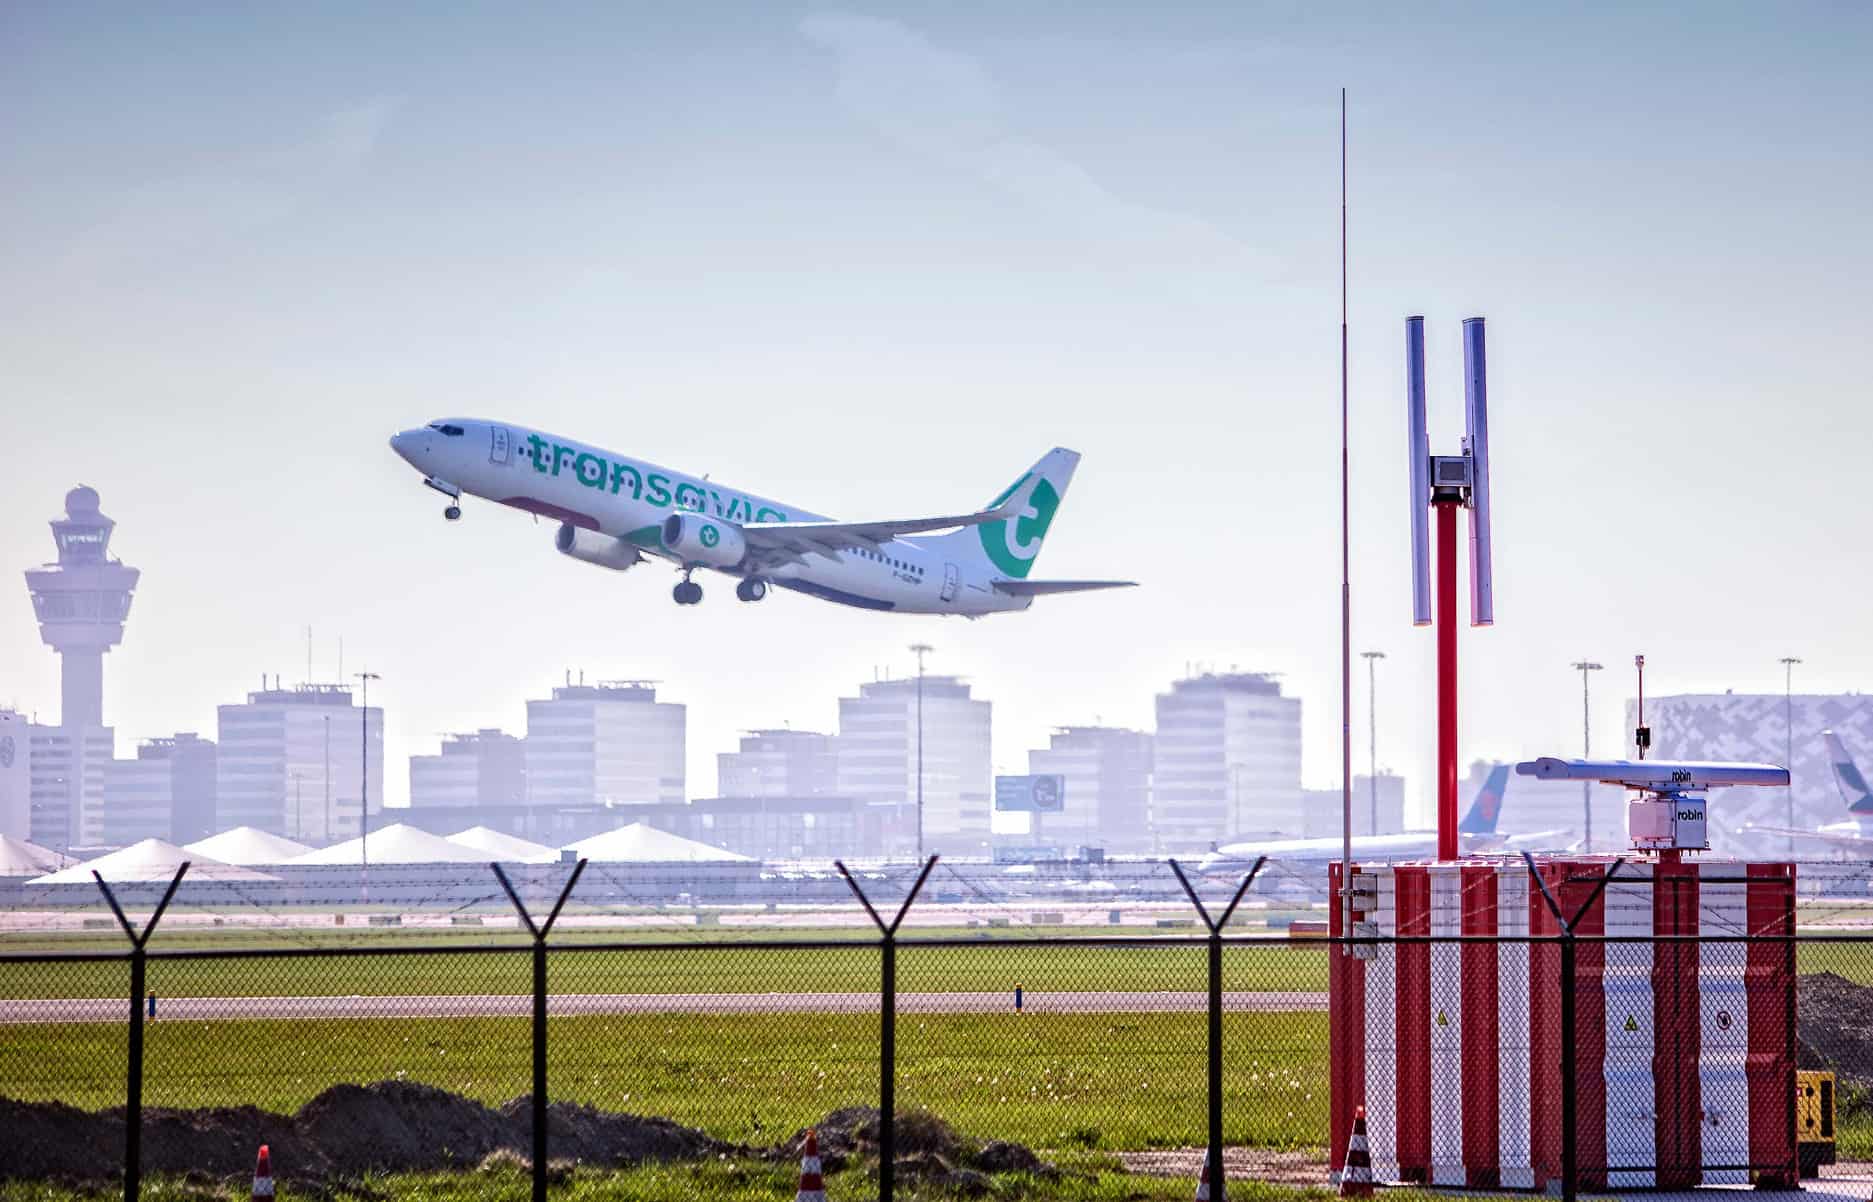 Commercial aeroplane taking off from Schiphol airport, with the skyline in the background